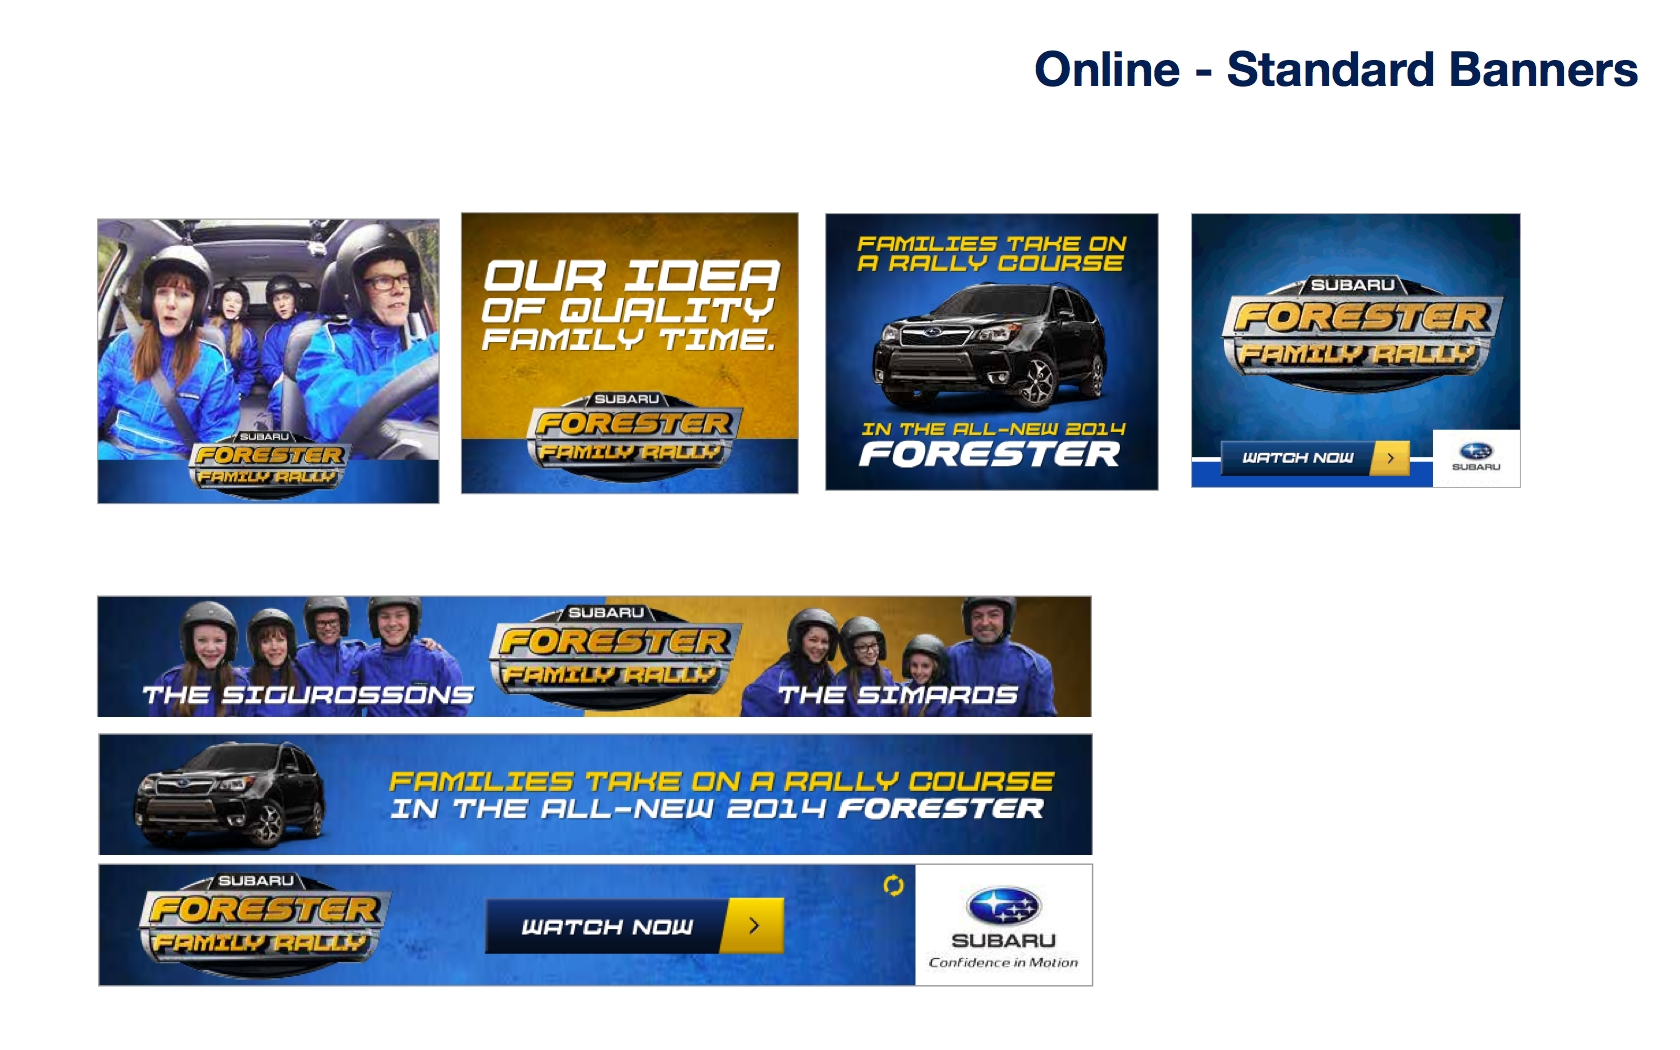 12325_Cassies_-_Subaru_Forester_Family_Rally_Creative_Elements.010